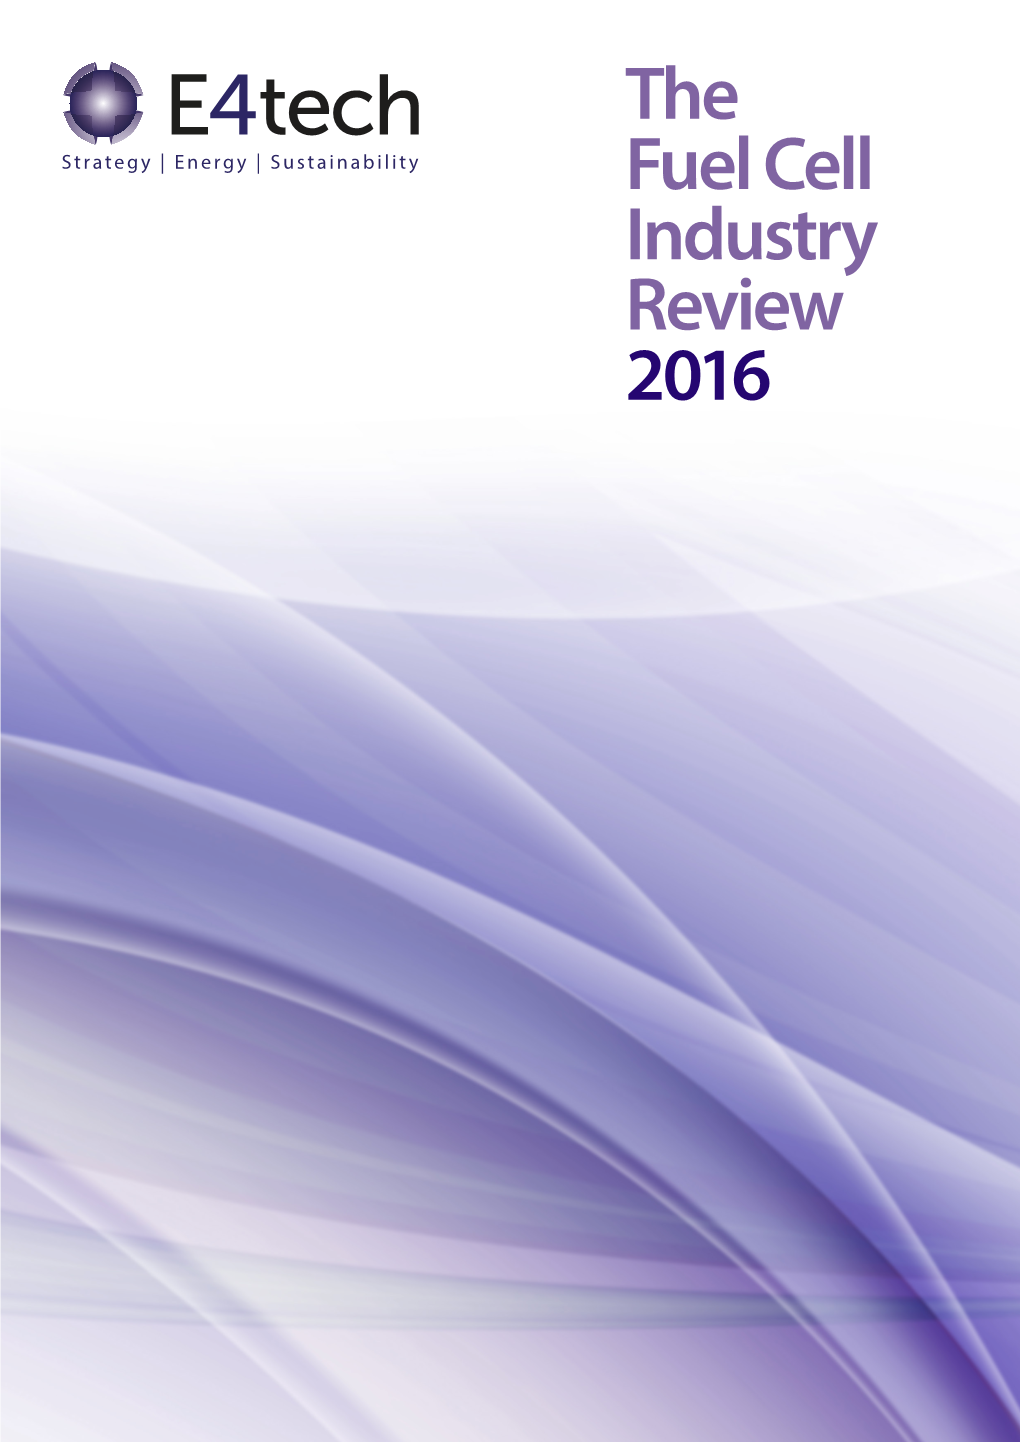 The Fuel Cell Industry Review 2016